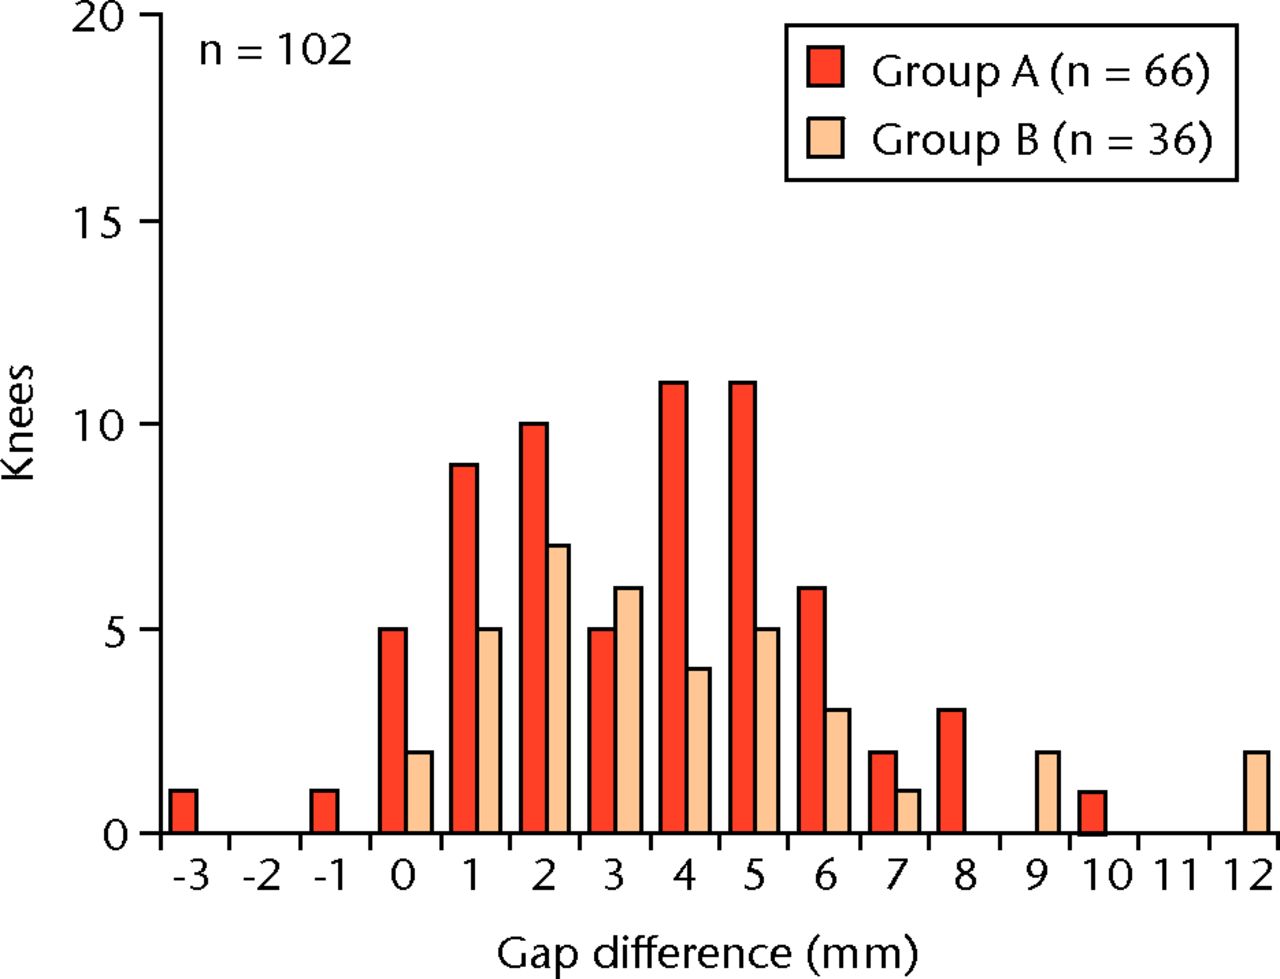 Figs. 4a - 4b 
          
            Figure 4a – Graph showing gap difference
between the extension gap and the corrected flexion gap. The mean
of the difference was 3.6 mm (sd 2.7) and the variation
of the difference was wide. Figure 4b – Graph showing gap difference
by group. GroupÂ A: pre-operative flexion contracture <
 20°. Group
B: flexion contracture ≥ 20°. The mean differences between extension
and corrected flexion gaps were 3.4 mm (sd 2.5) in group
A and 3.9 mm (sd 3.0) in group B, (p = 0.42). Additionally,
if groups A and B are divided at flexion contracture of 15°, 25°
and 30°, the p-values are 0.39, 0.38 and 0.20 respectively. 
        